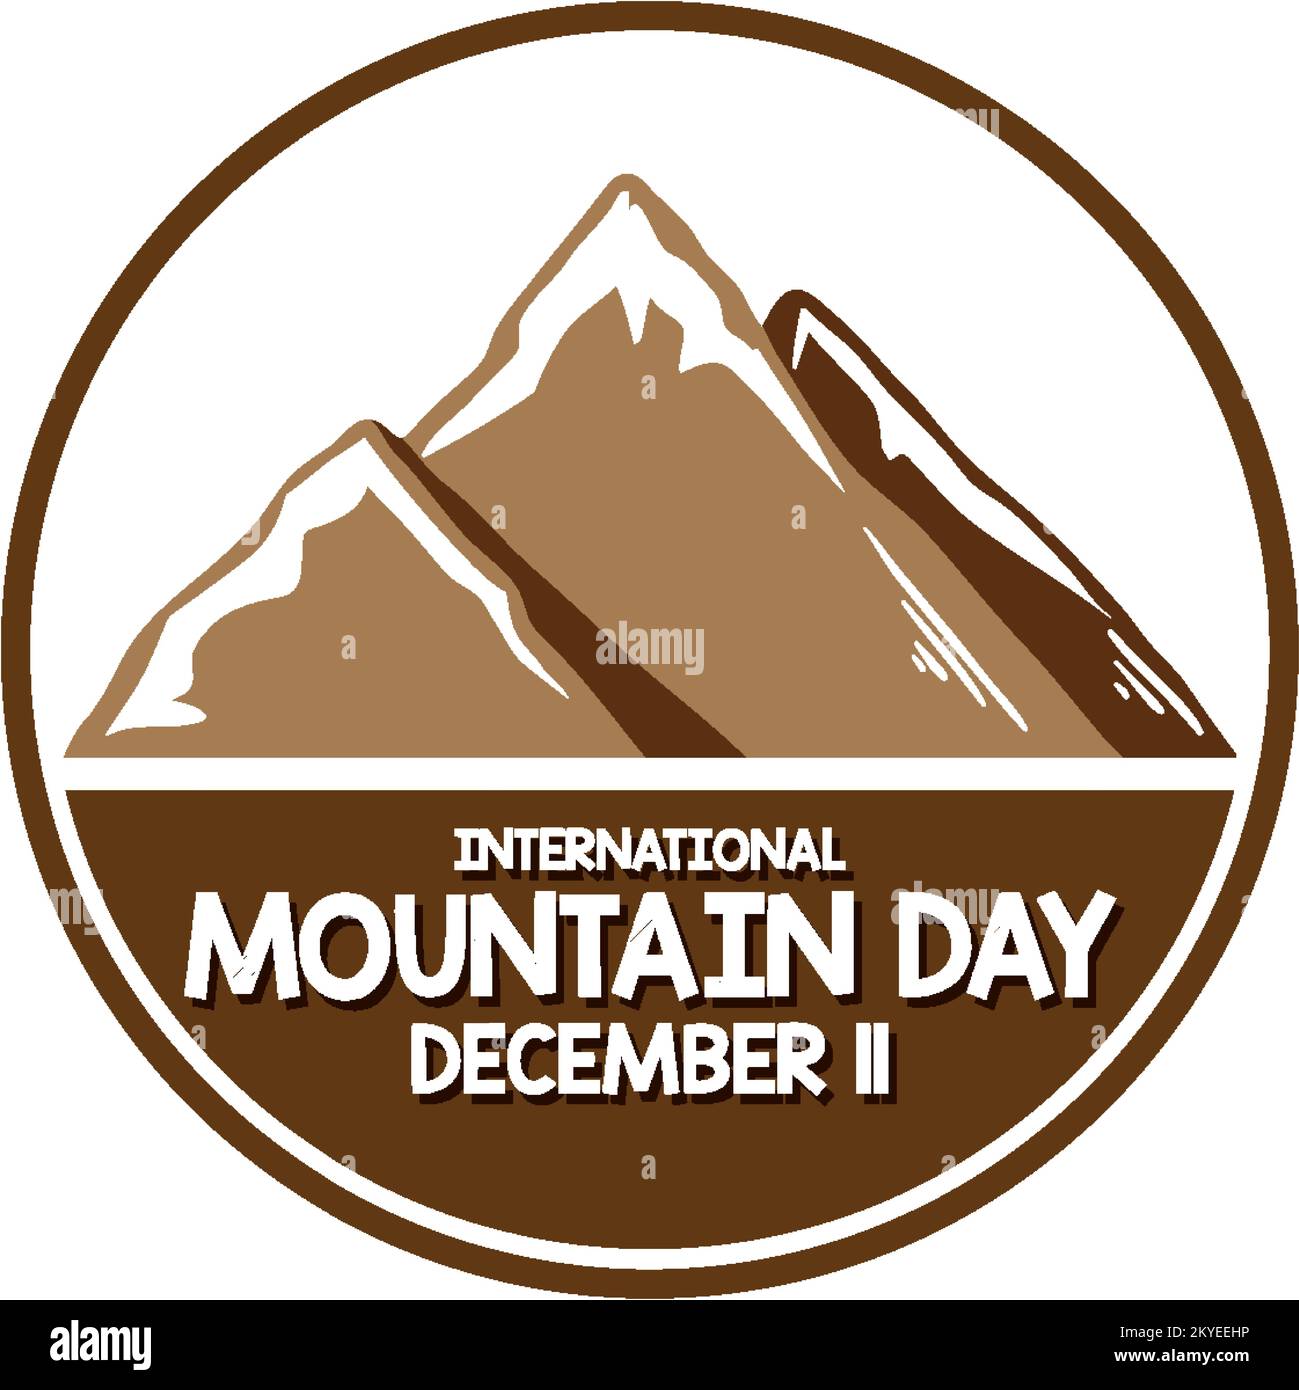 International mountain day text for poster design illustration Stock Vector